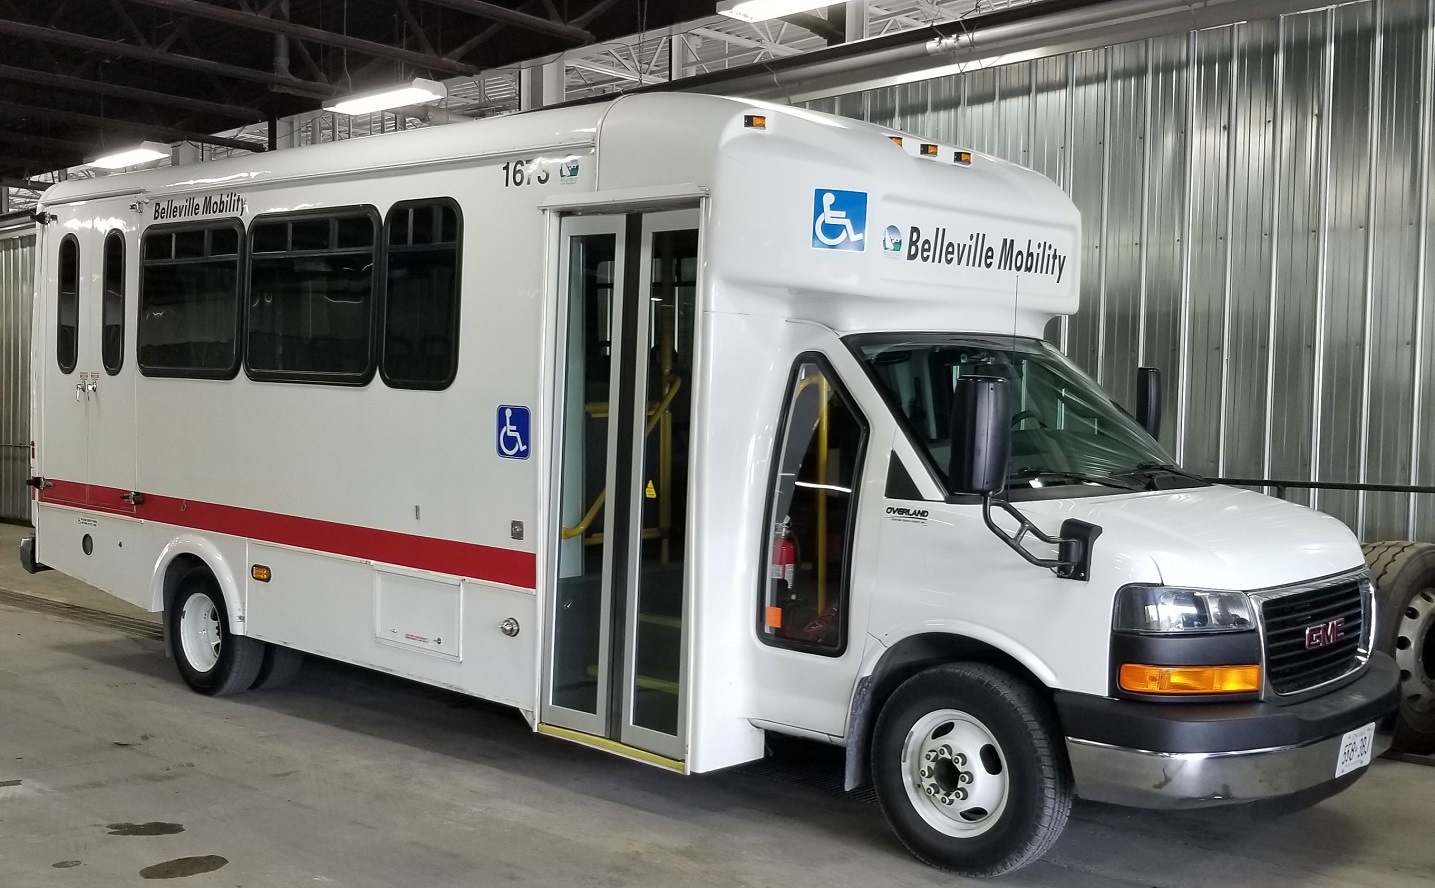 the mobility bus is a specialized transit vehicle that features standard front door boarding and rear boarding lift option. They are shorter than a conventional transit bus.